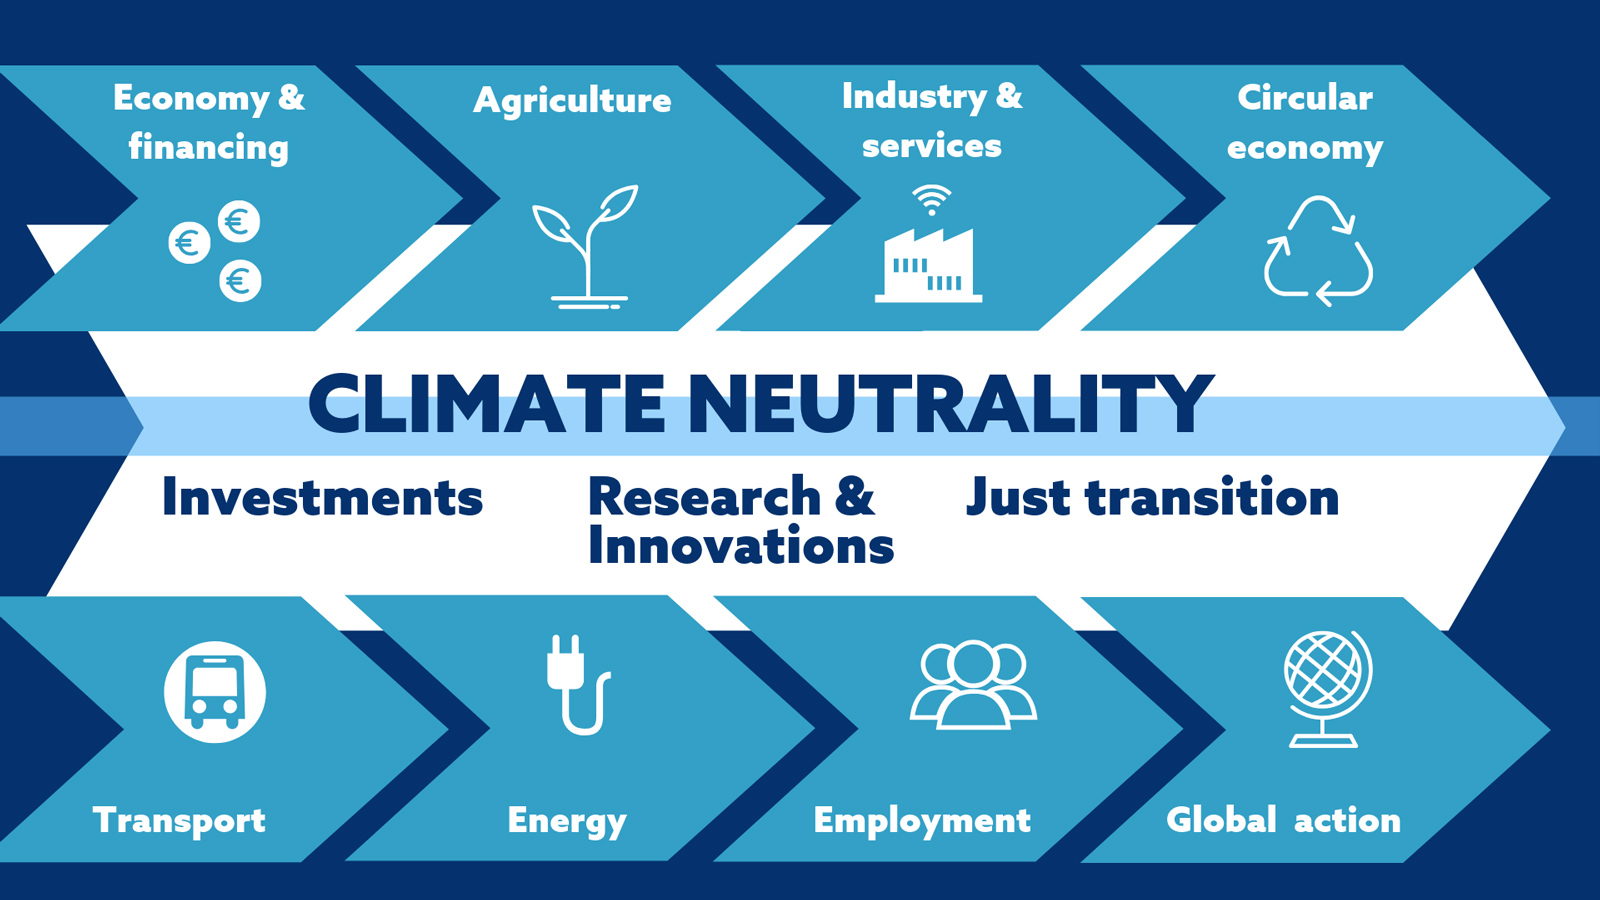 The figure shows some means to achieve climate neutrality: economy and finance, agriculture, industry and services, circular economy, transport, energy, employment and foreign policy